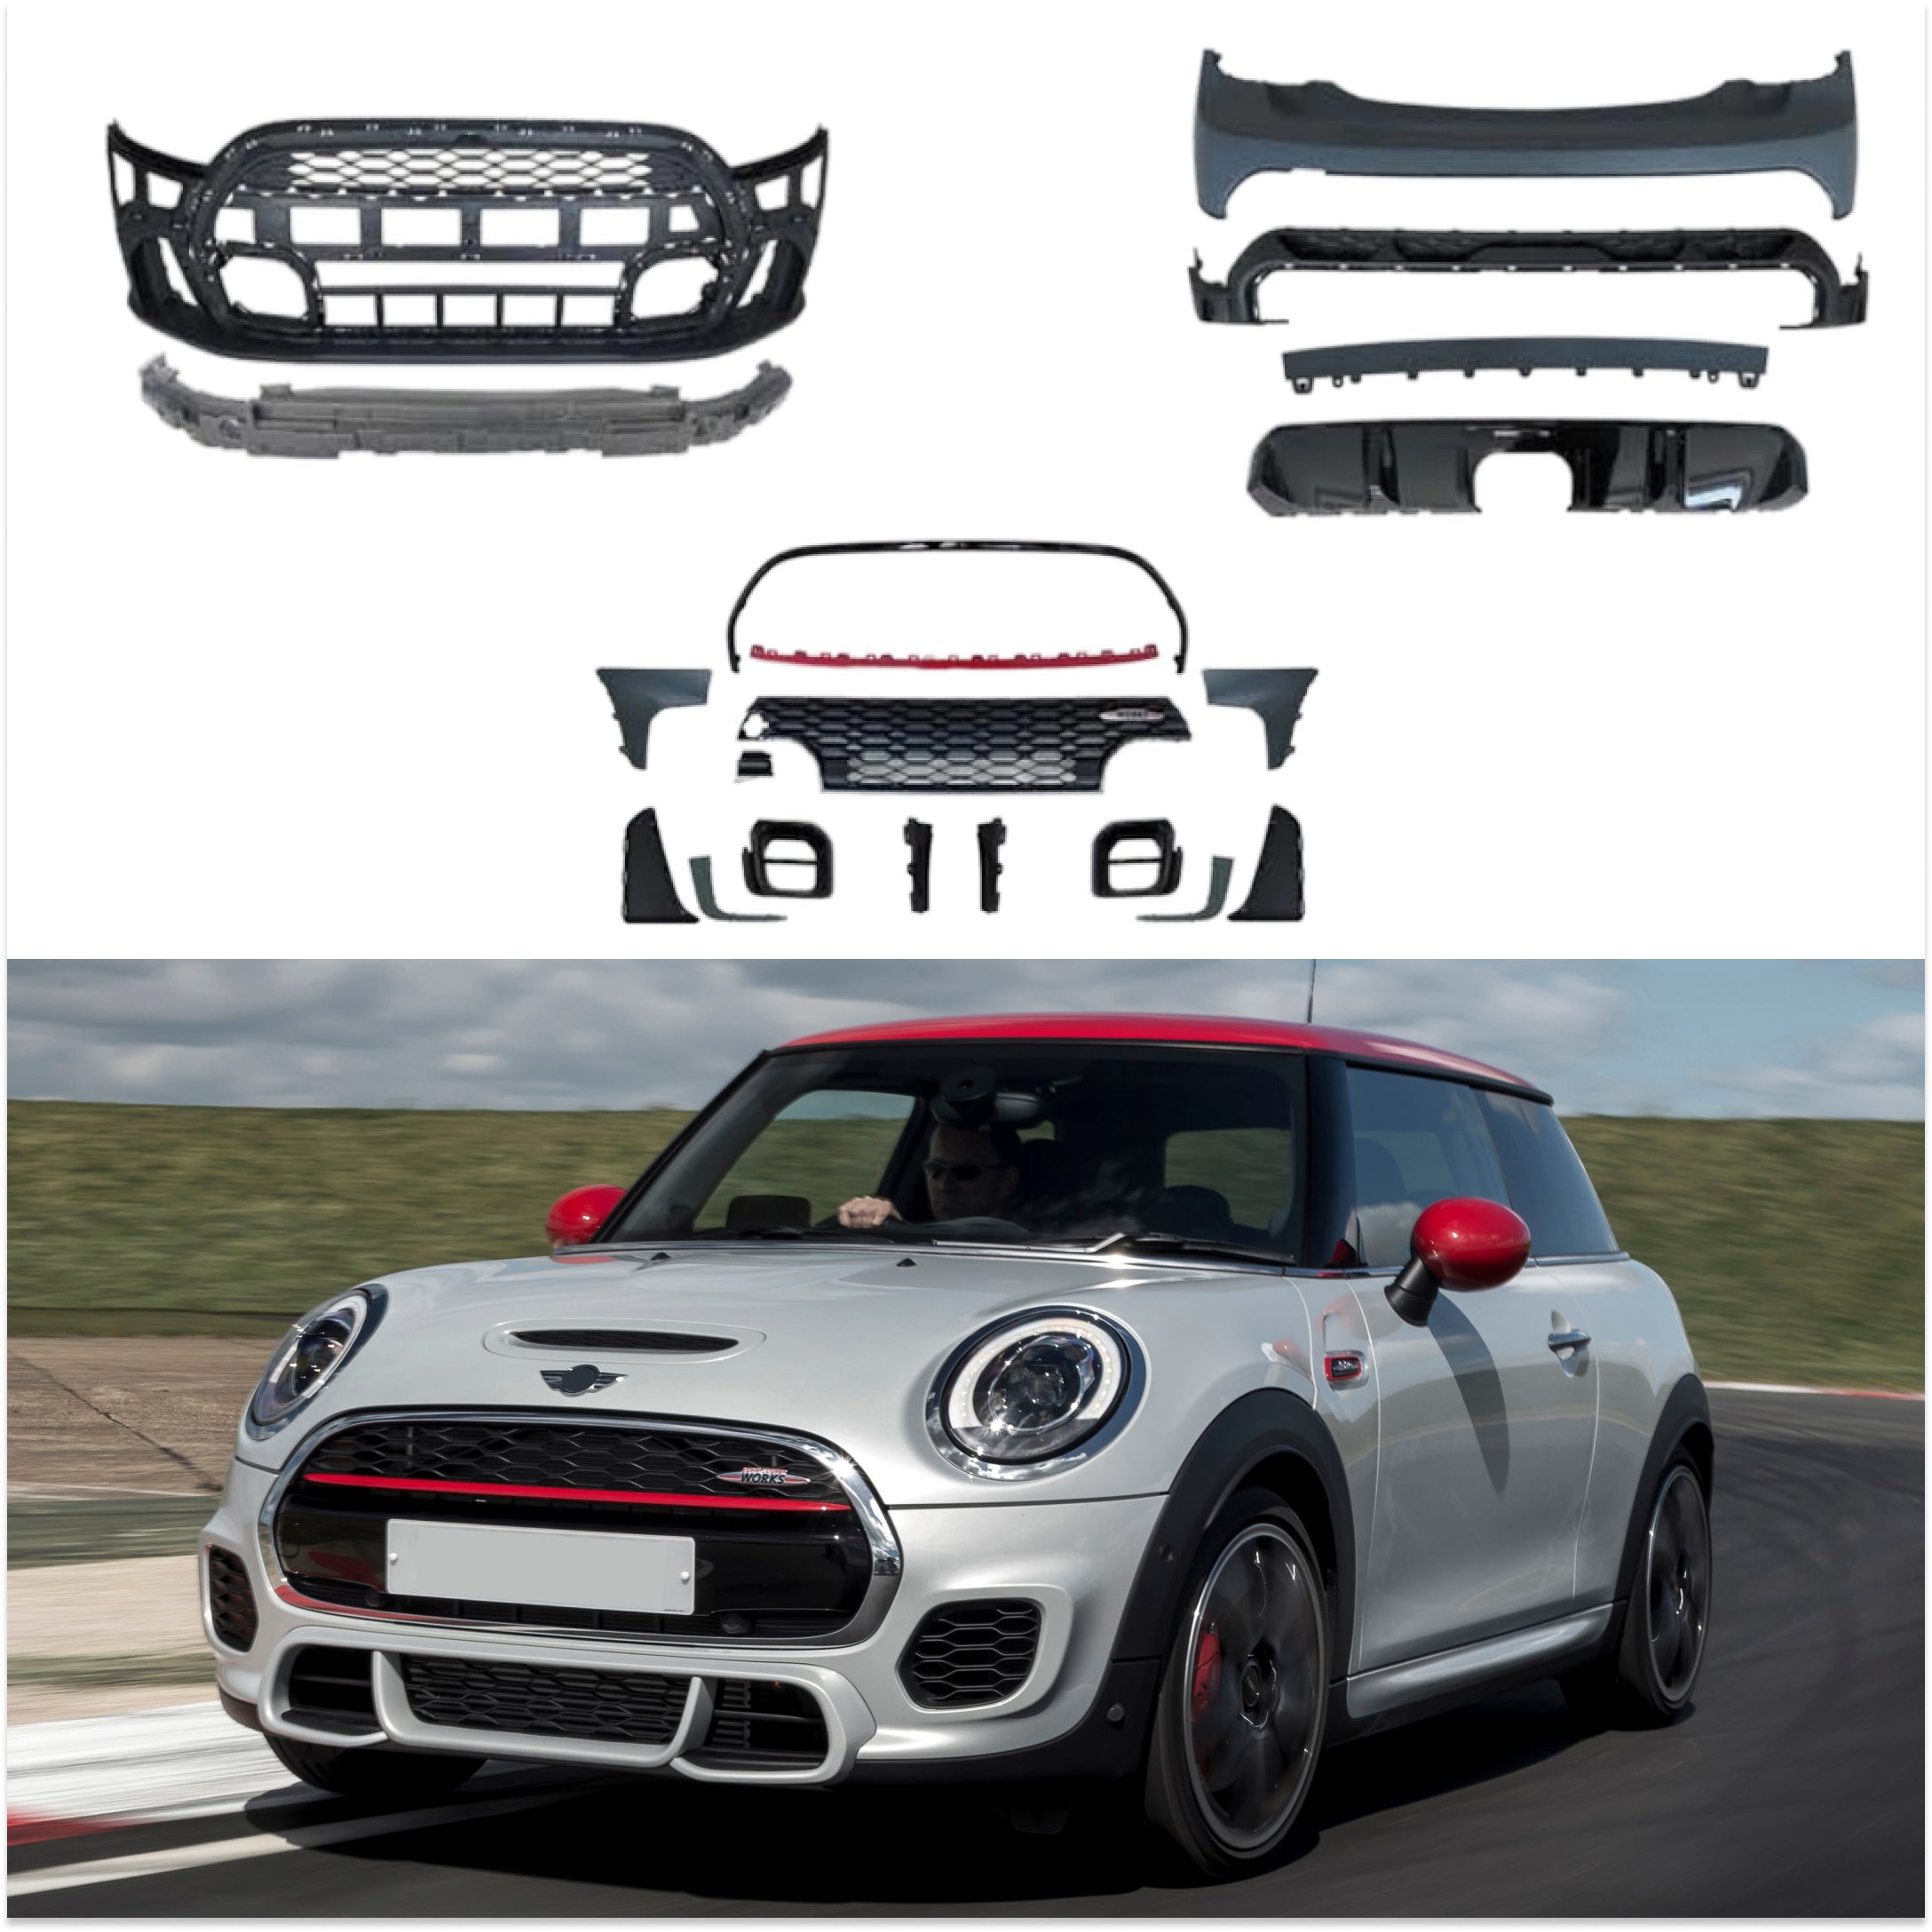 Mini F57 John Cooper Works Convertible with DuelL Bodykit